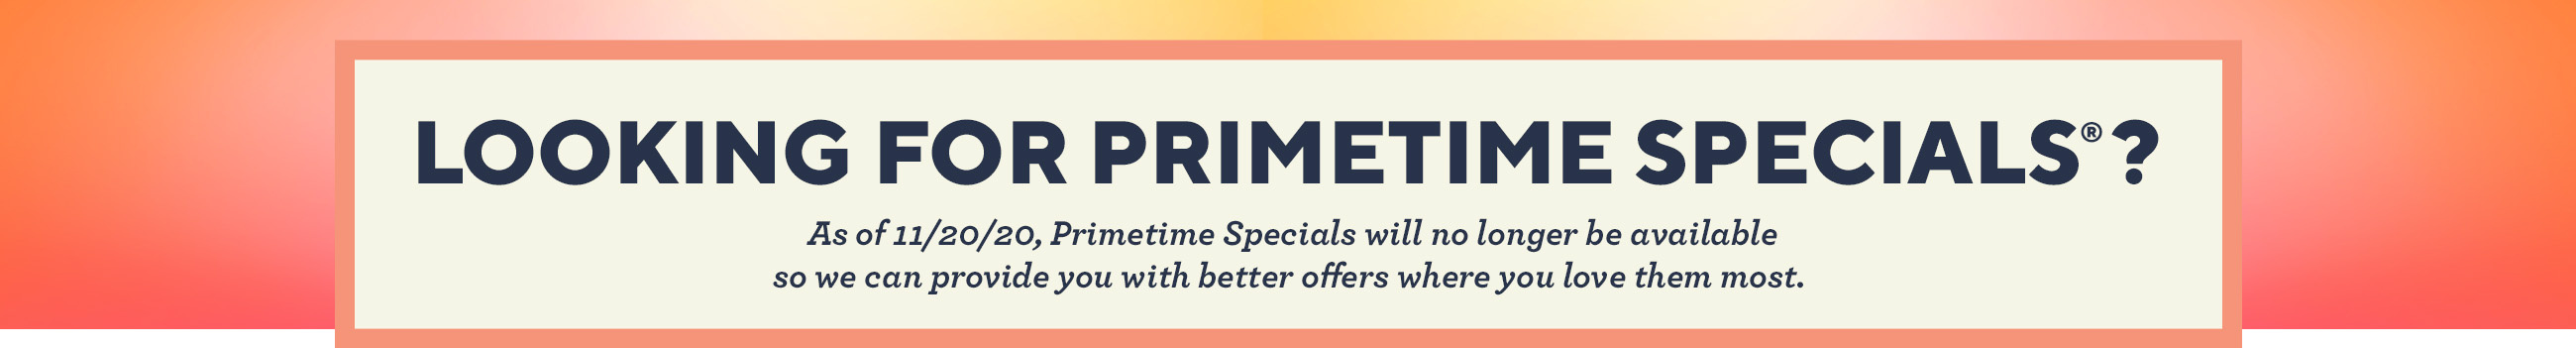 Looking for Primetime Specials®?  As of 11/20/20, Primetime Specials will no longer be available so we can provide you with better offers where you love them most. 